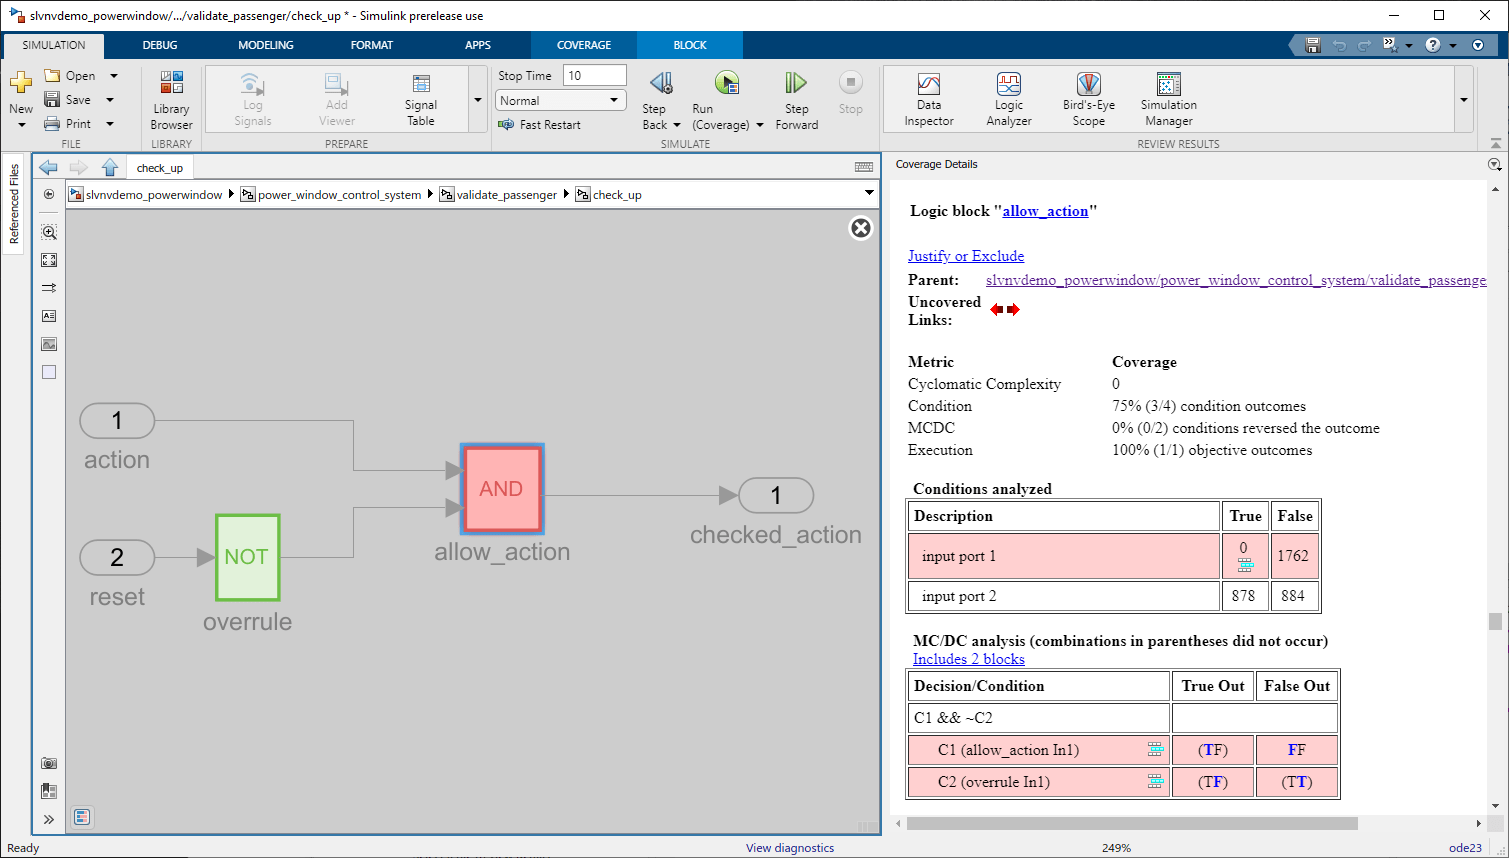 Simulink window after clicking on the And block. The And block is red and the coverage report is displayed on the right.